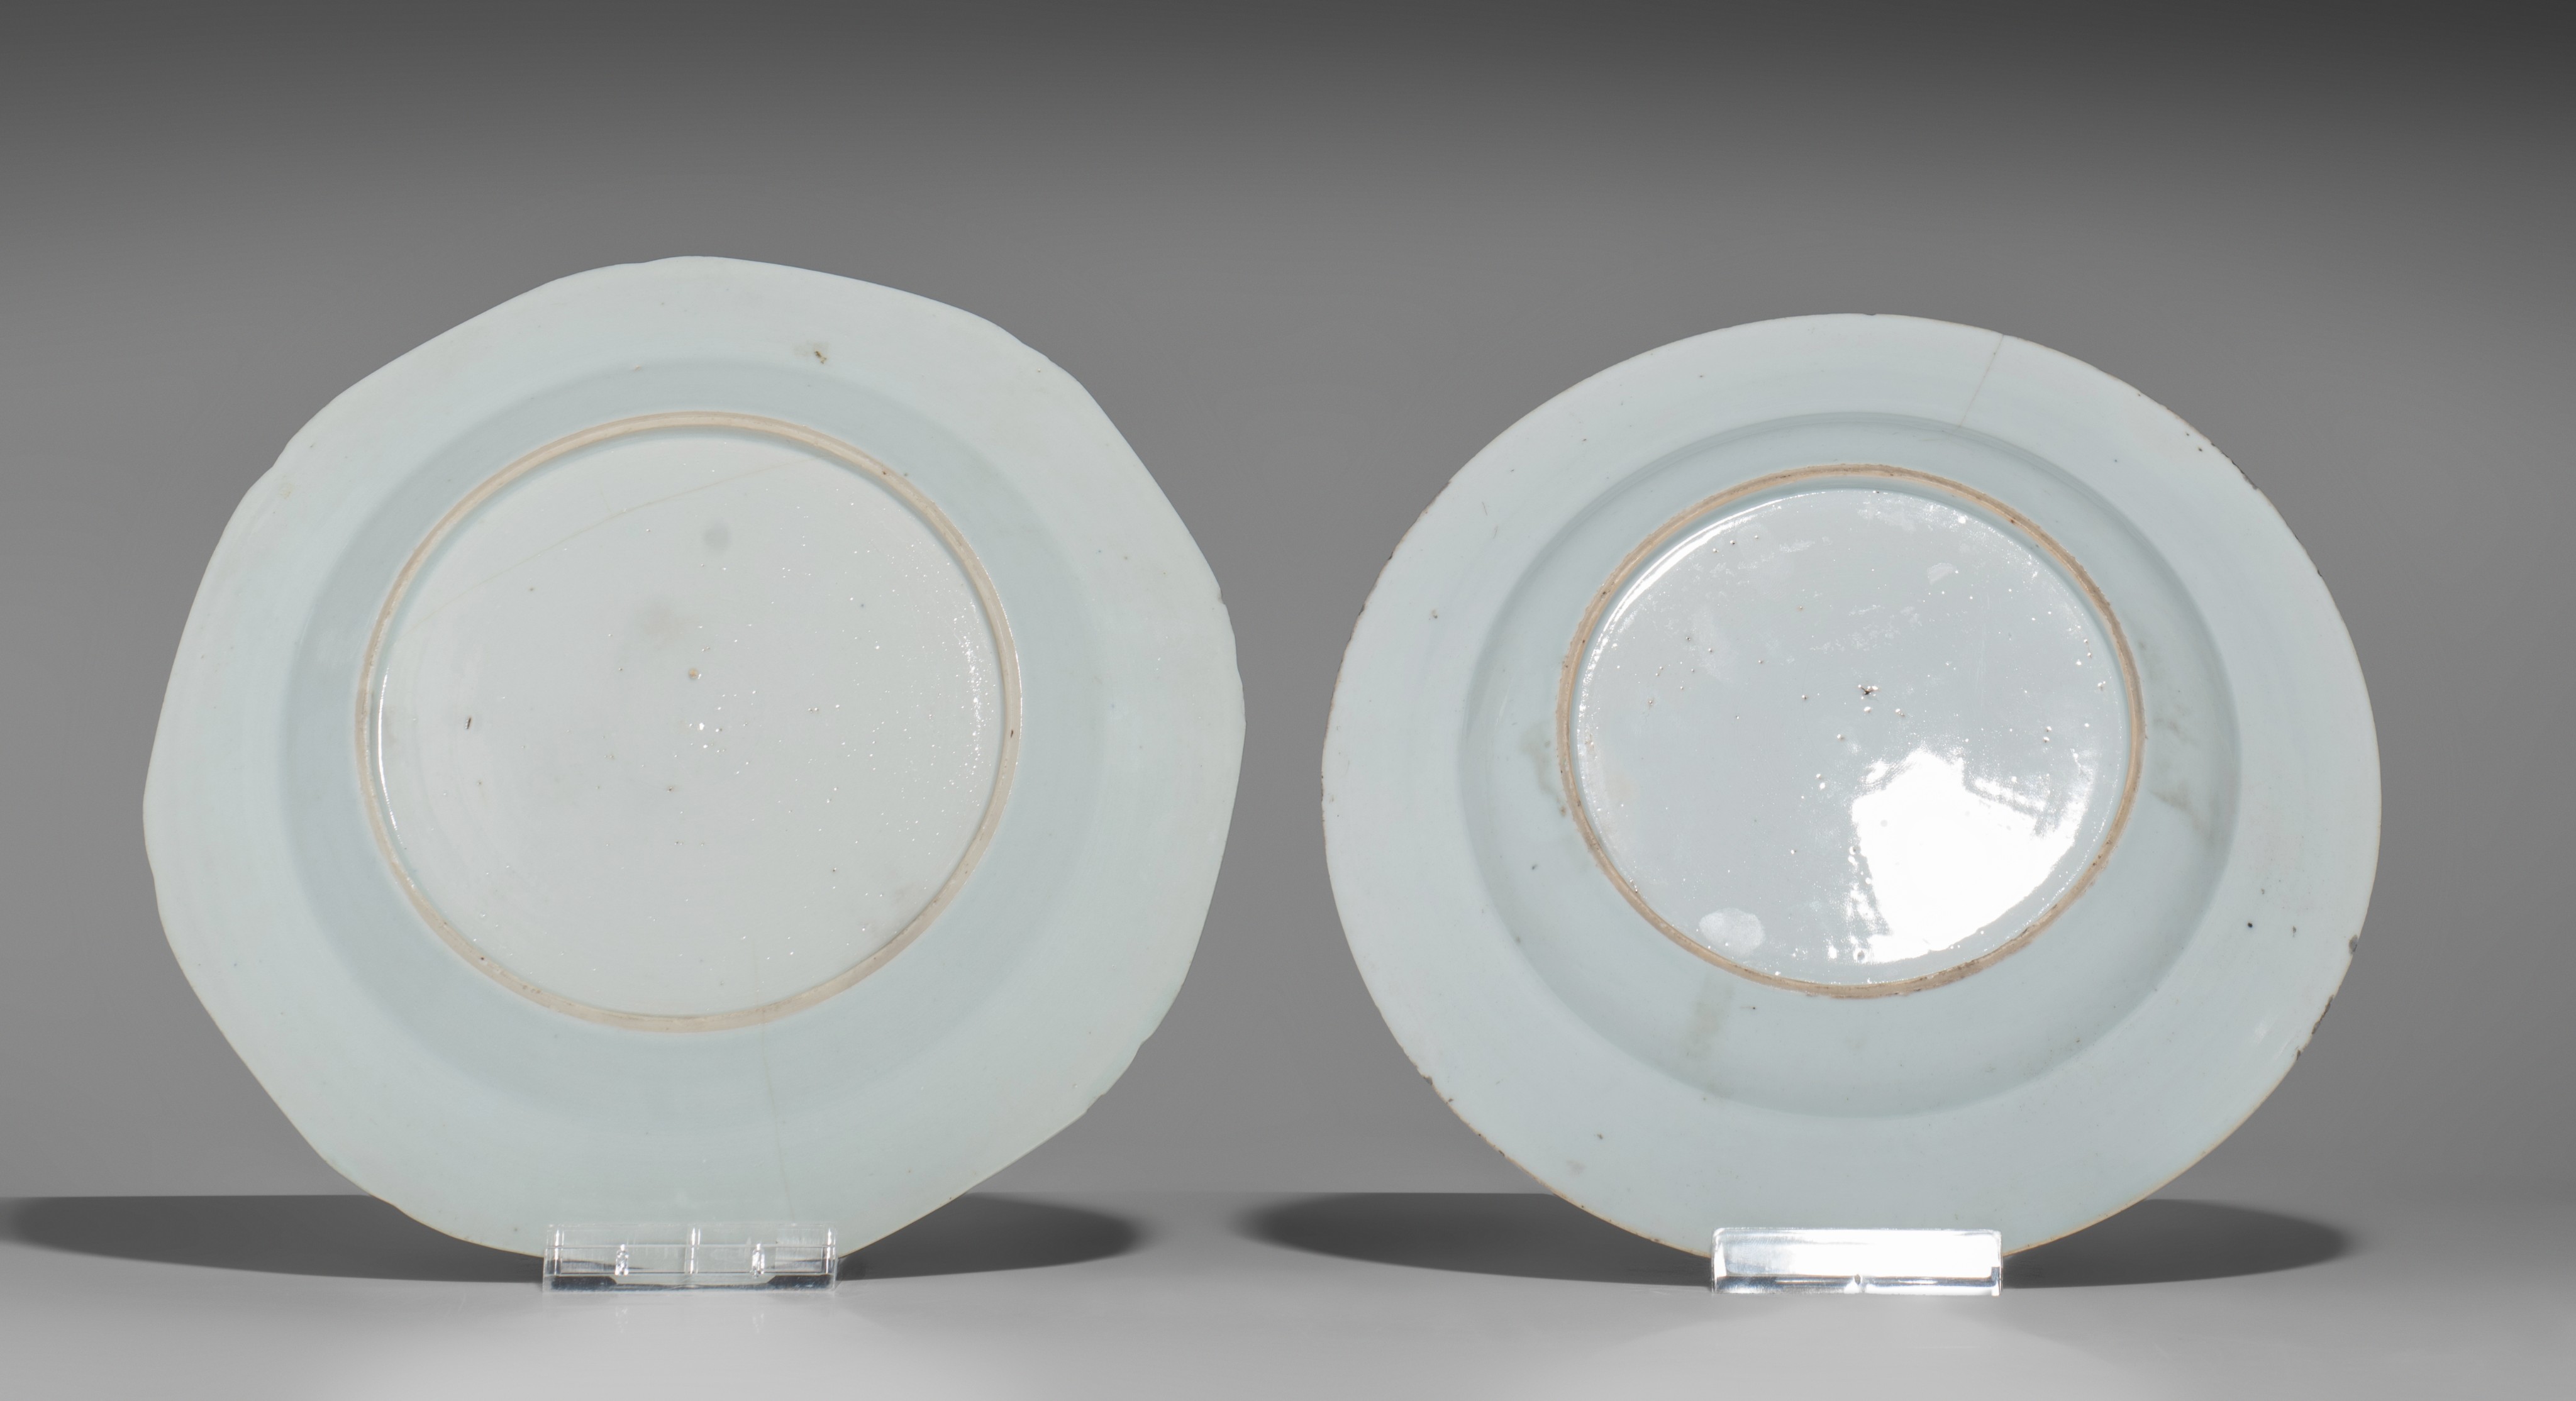 A collection of various Chinese export porcelain plates, Wanli, Qianlong and Guangxu period, ø 22 - - Image 11 of 11